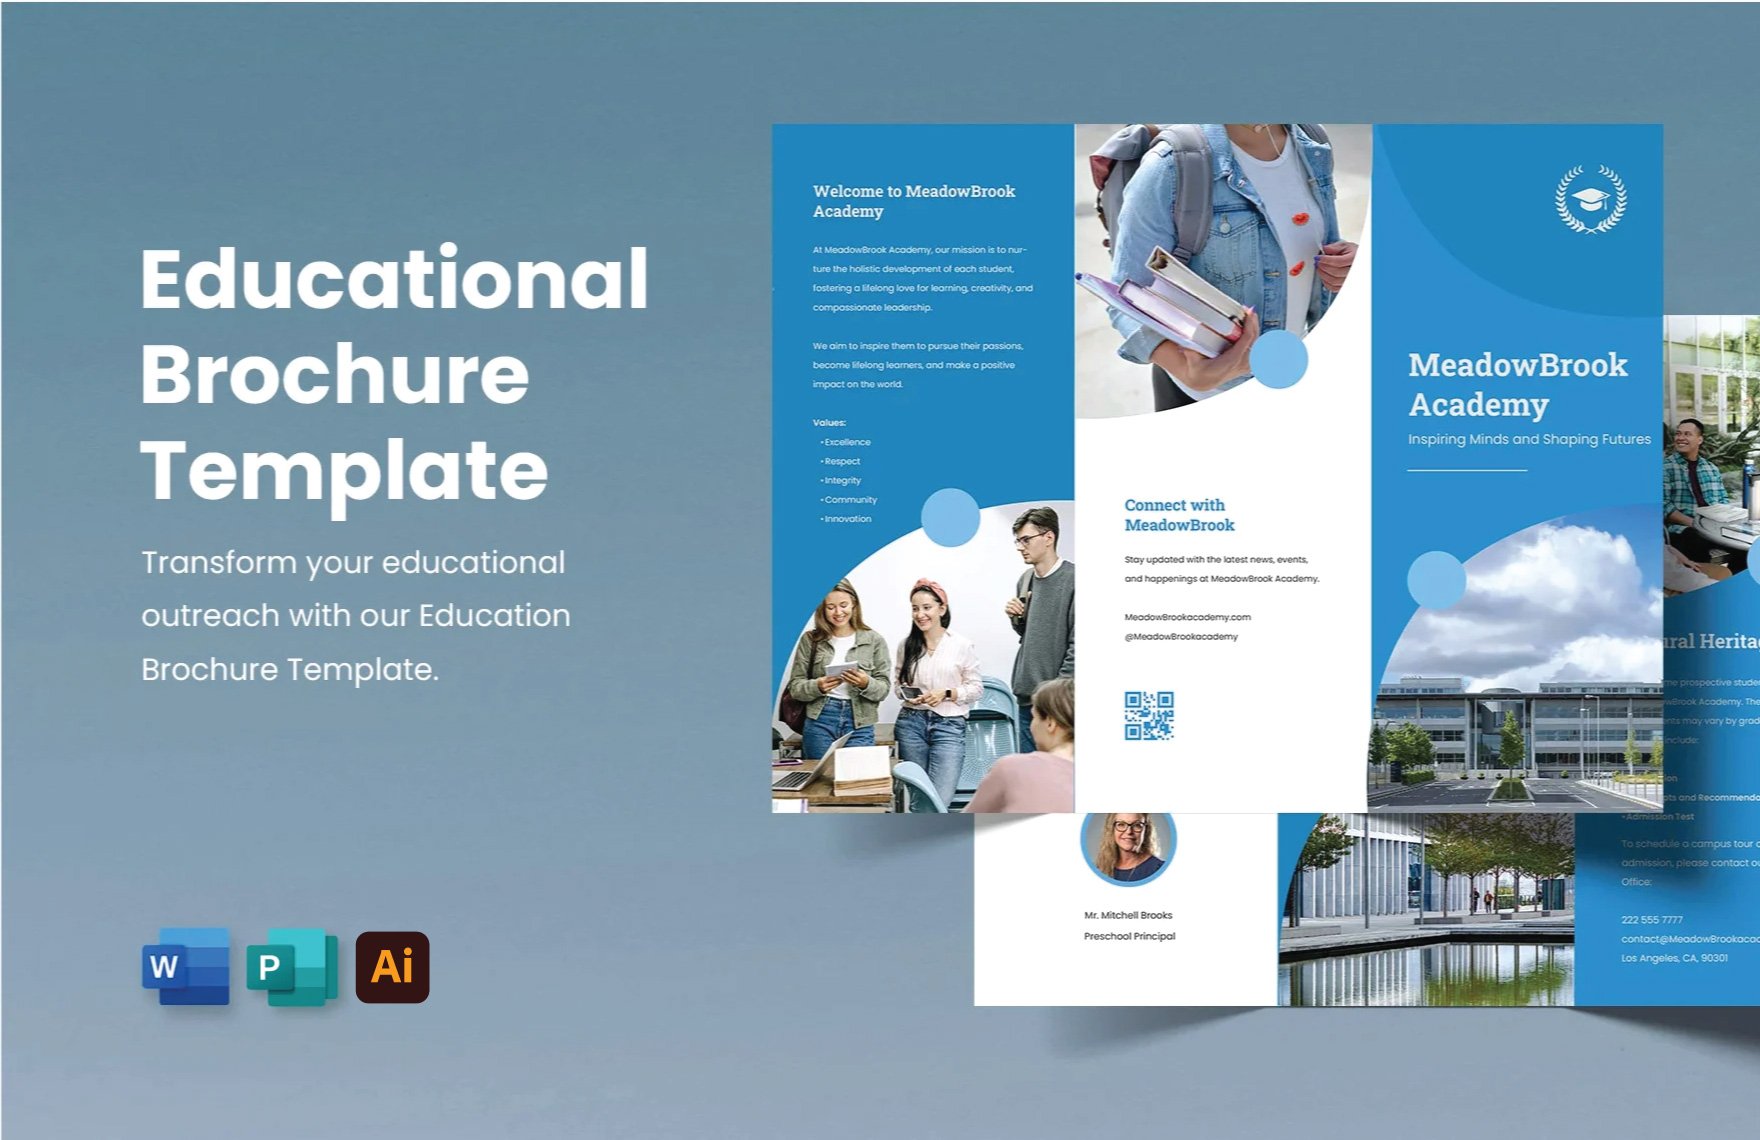 Educational Brochure Template in Word, Illustrator, Publisher